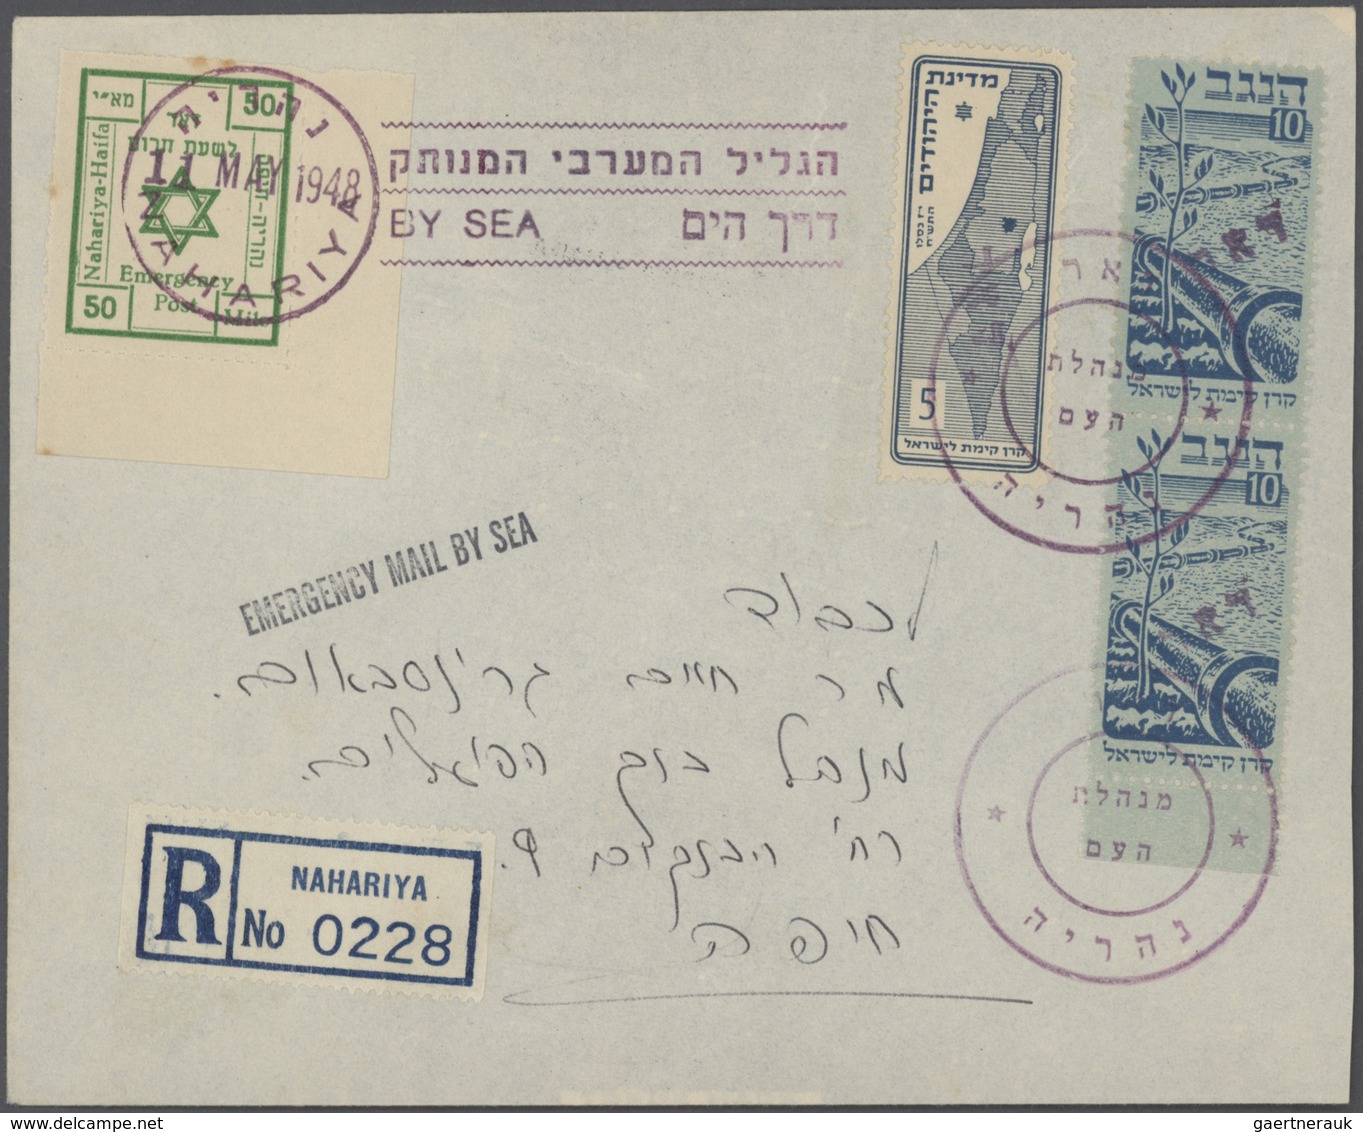 Br Israel: FORERUNNER / LOCALS: 1948, great lot of over 200 covers mostly "NAHARIYA EMERGENCY MAIL" phi